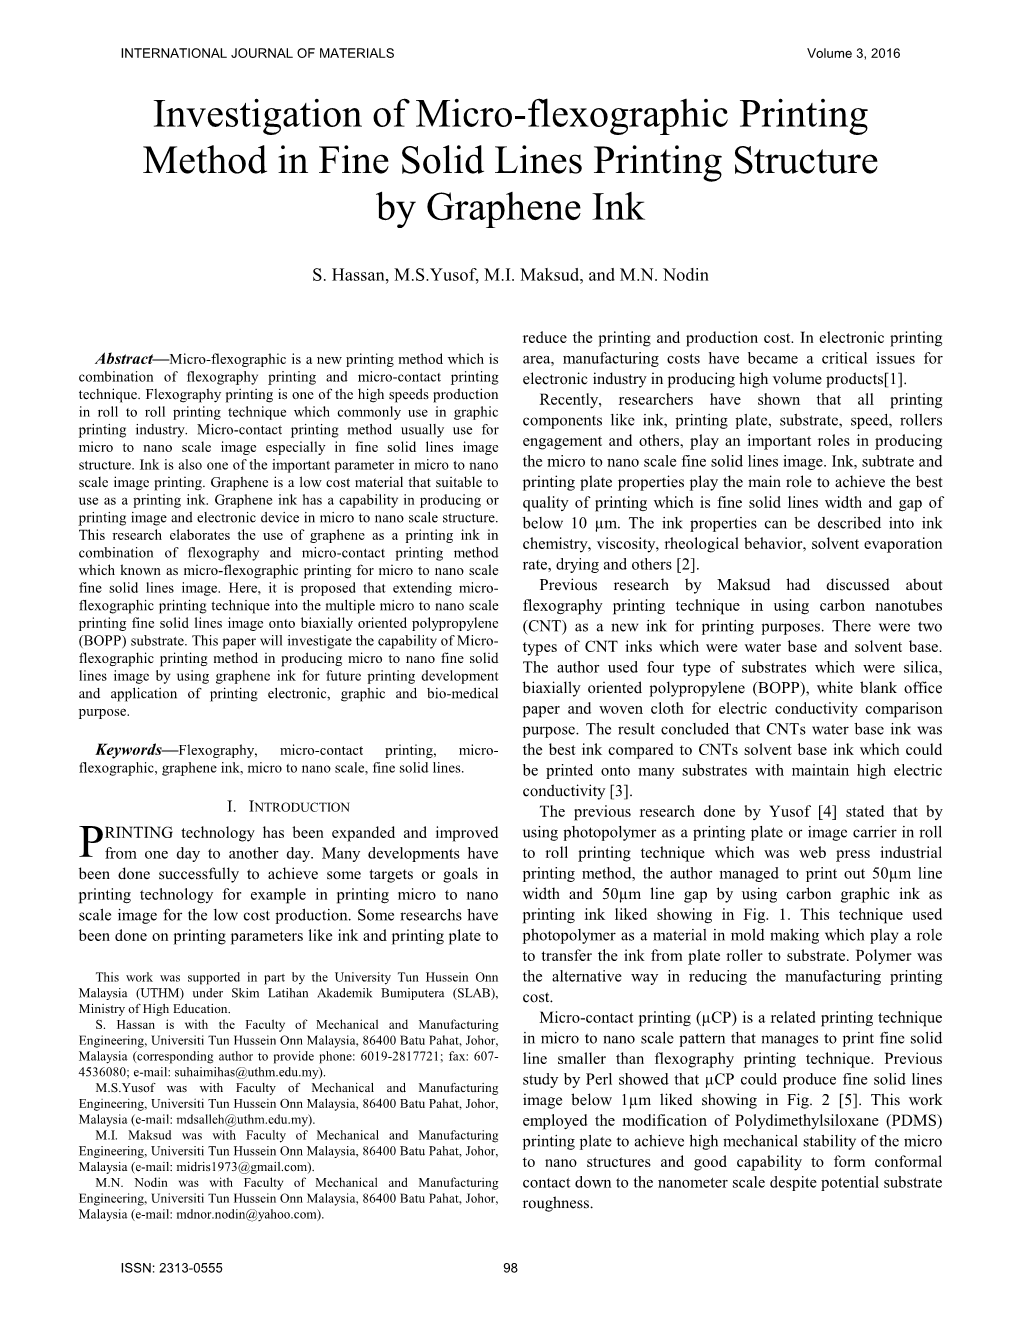 Investigation of Micro-Flexographic Printing Method in Fine Solid Lines Printing Structure by Graphene Ink